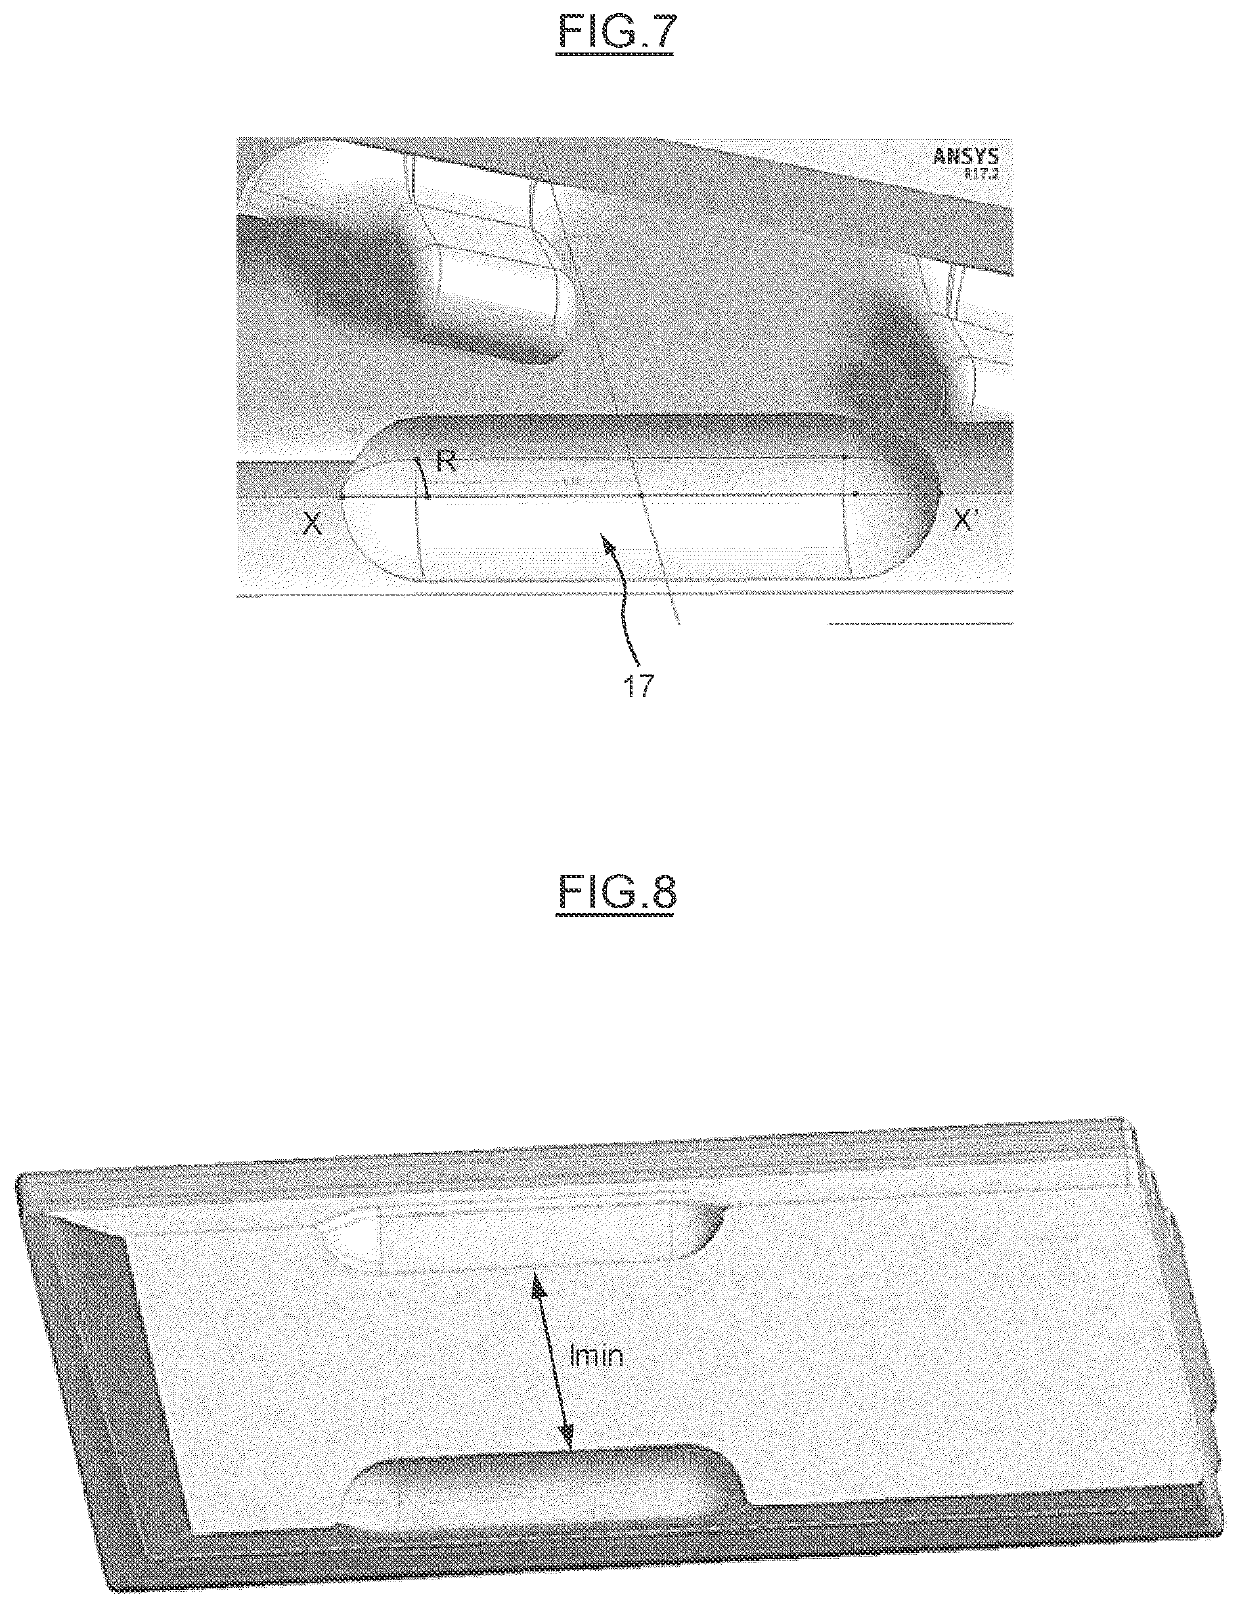 Turbine vane provided with a recess for embrittlement of a frangible section